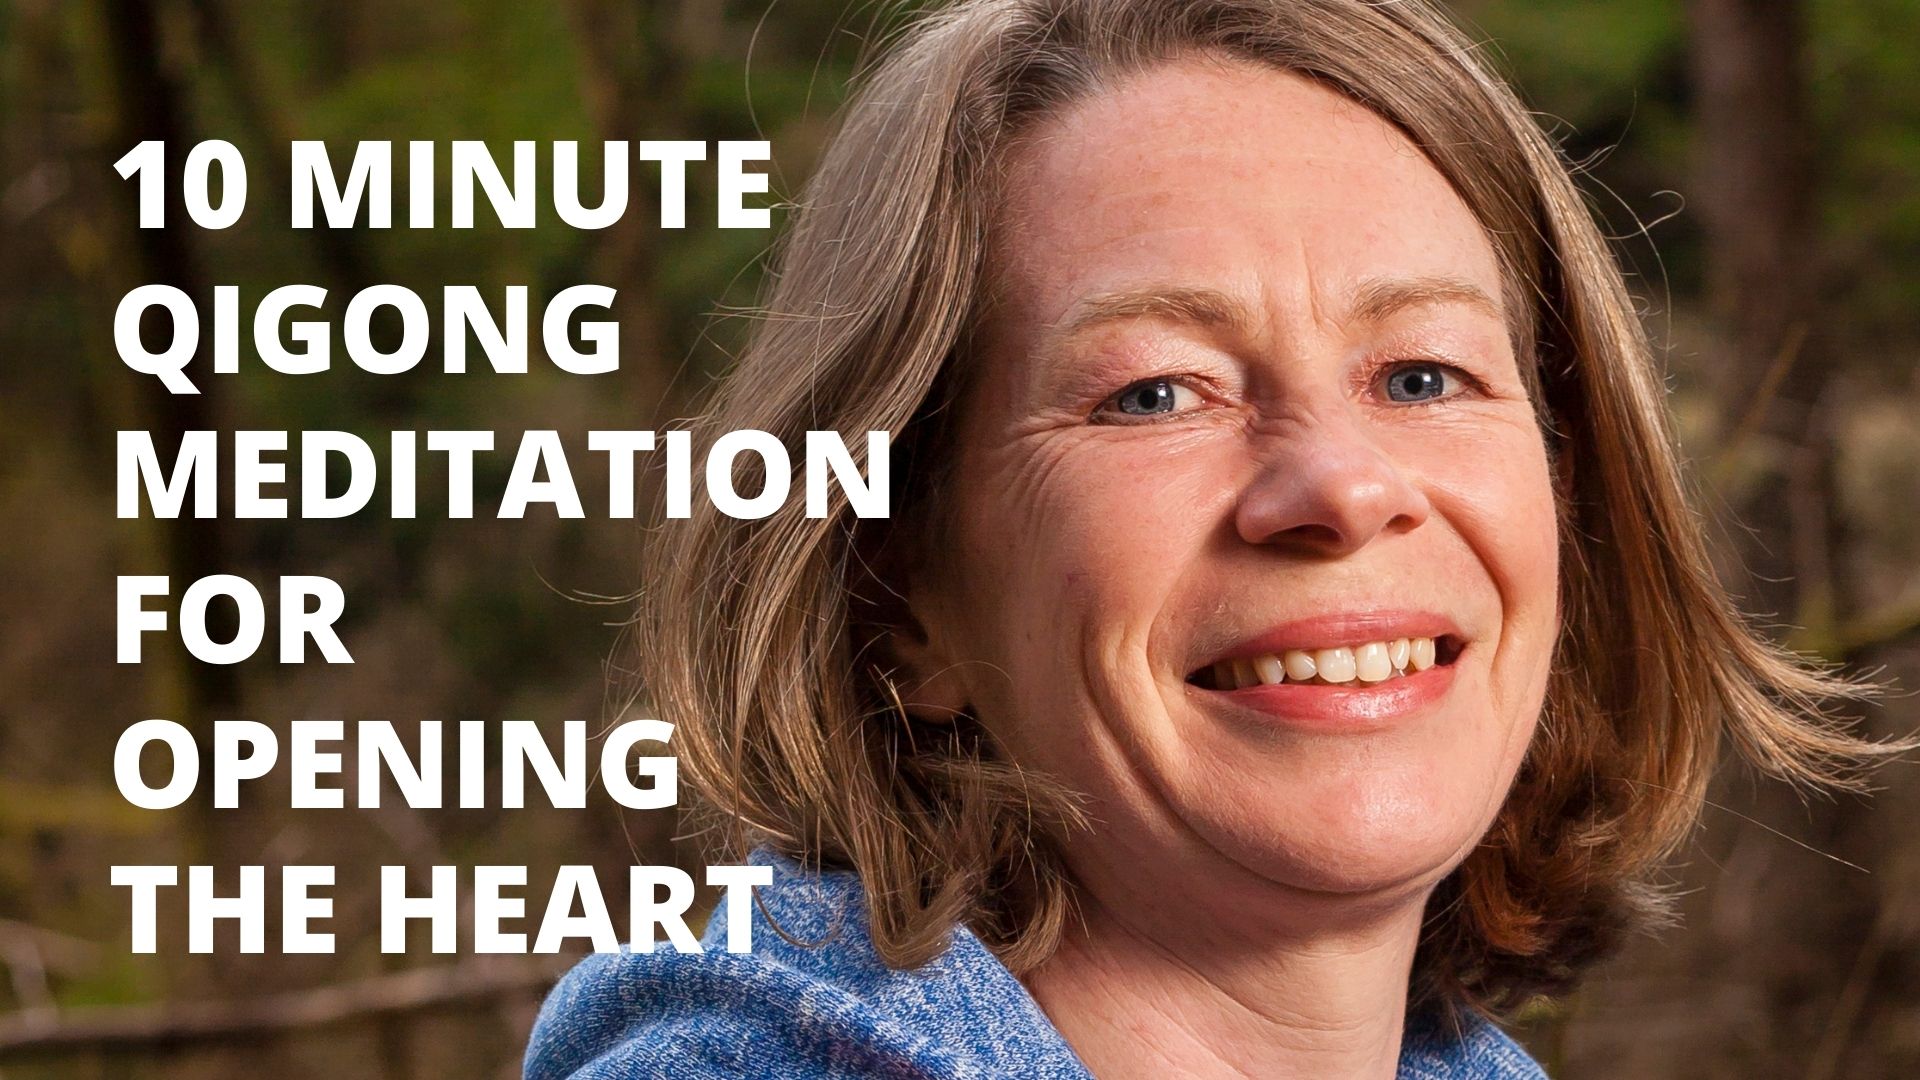 10_Minute_Qigong_Meditation_For_Opening_The_Heart